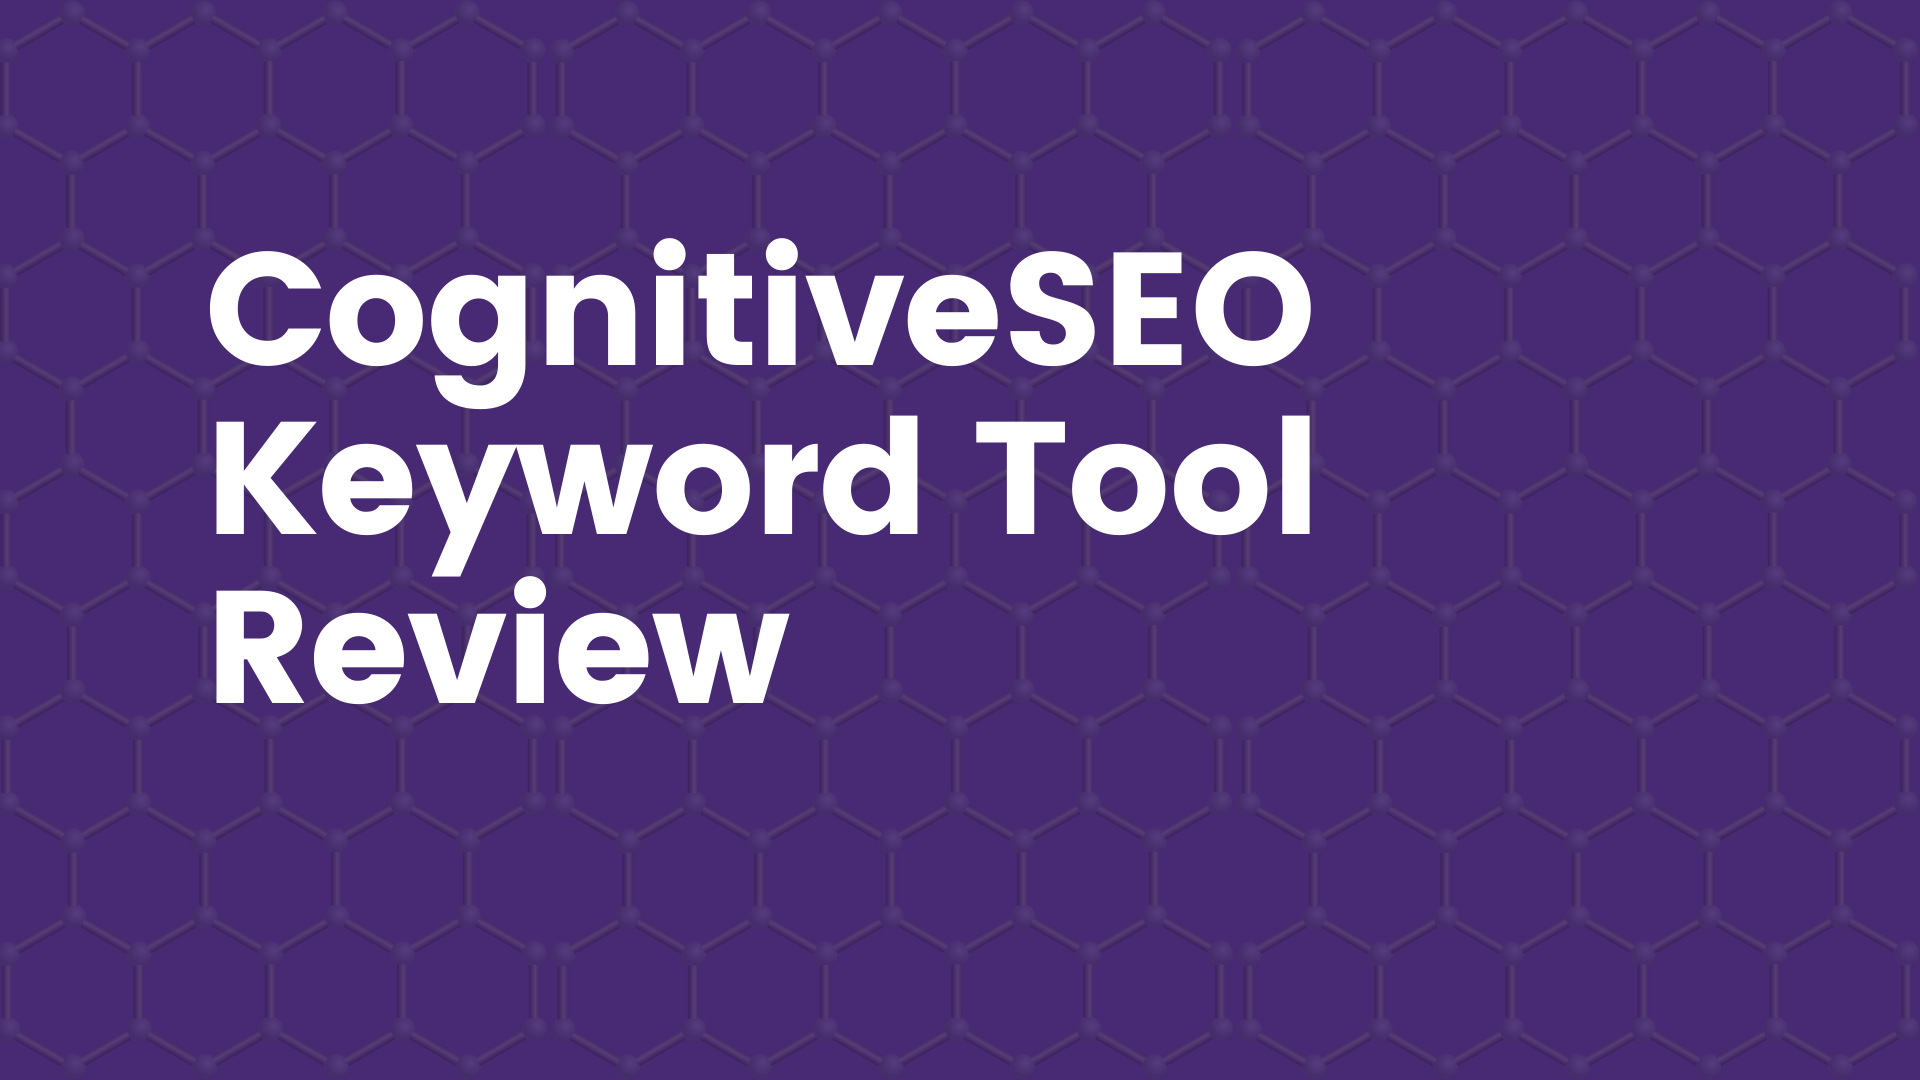 Cognitiveseo Keyword Tool Review